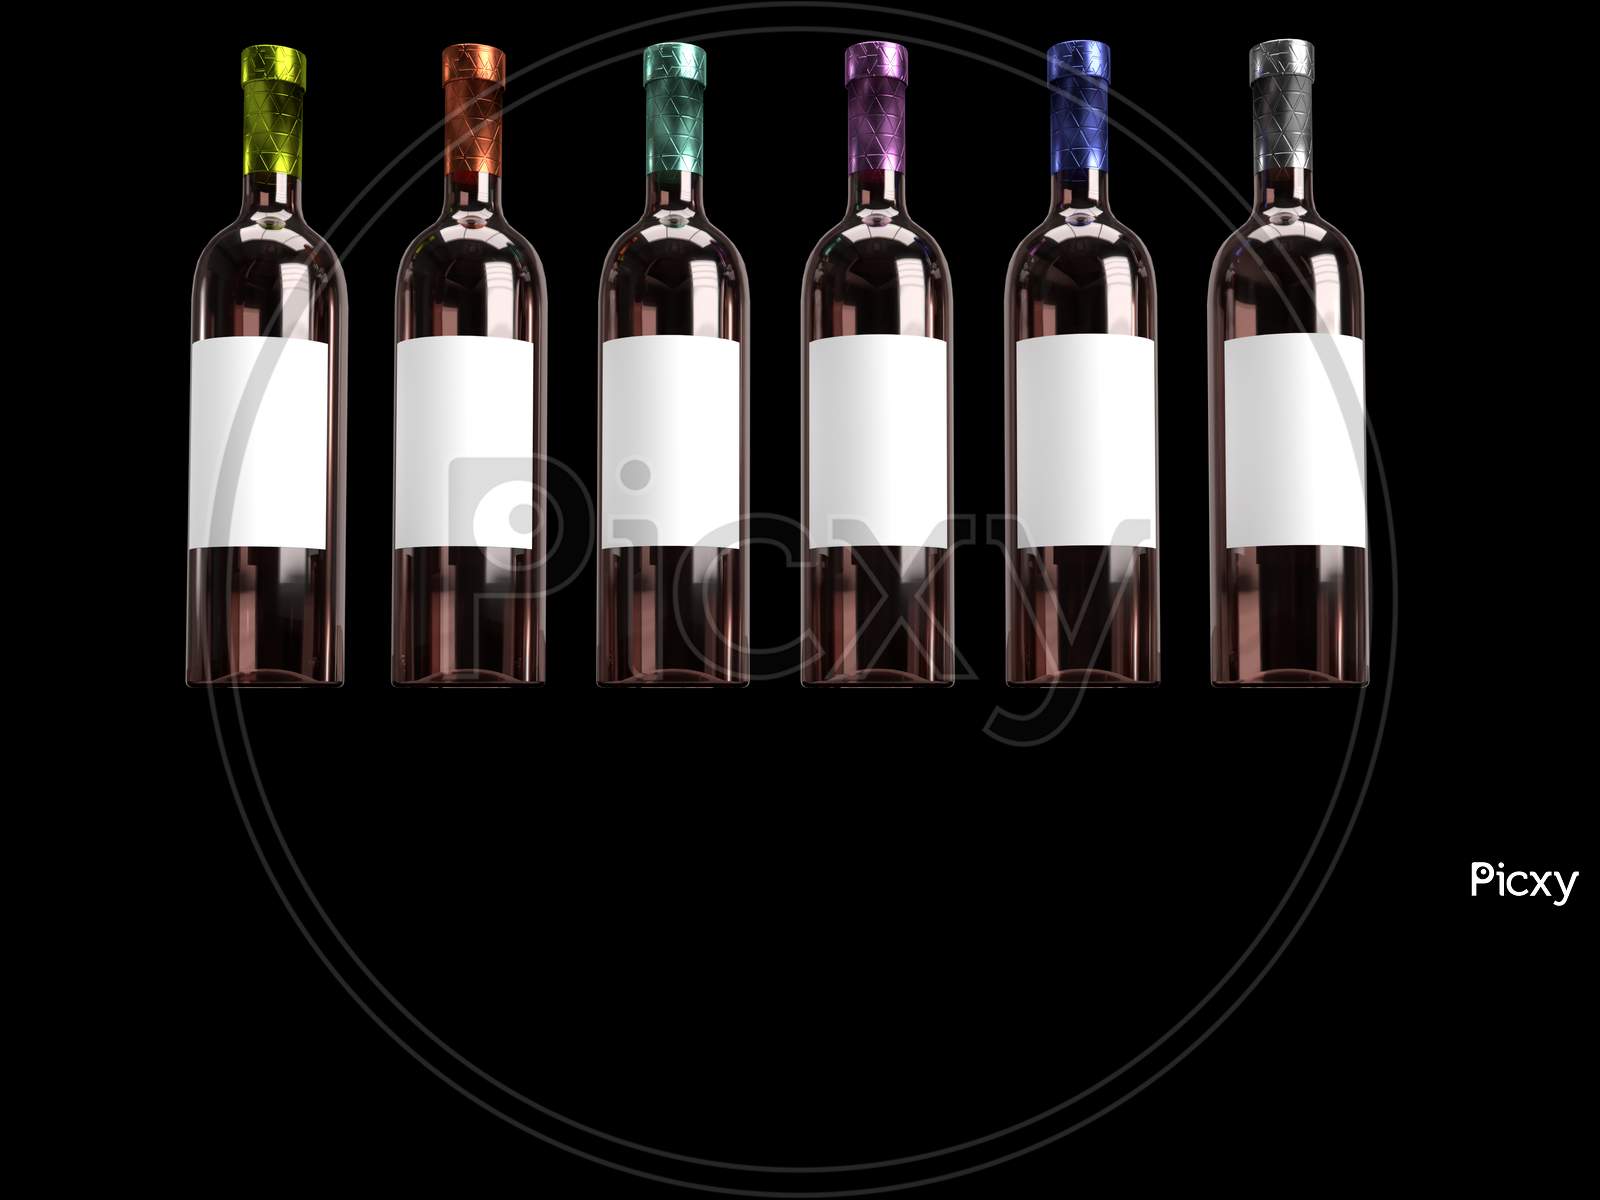 3D Render Of Different Colored Foil Sealed Amber Glass Wine Bottle In Solid Black Background On Reflective Surface With White Blank Label For Mockup